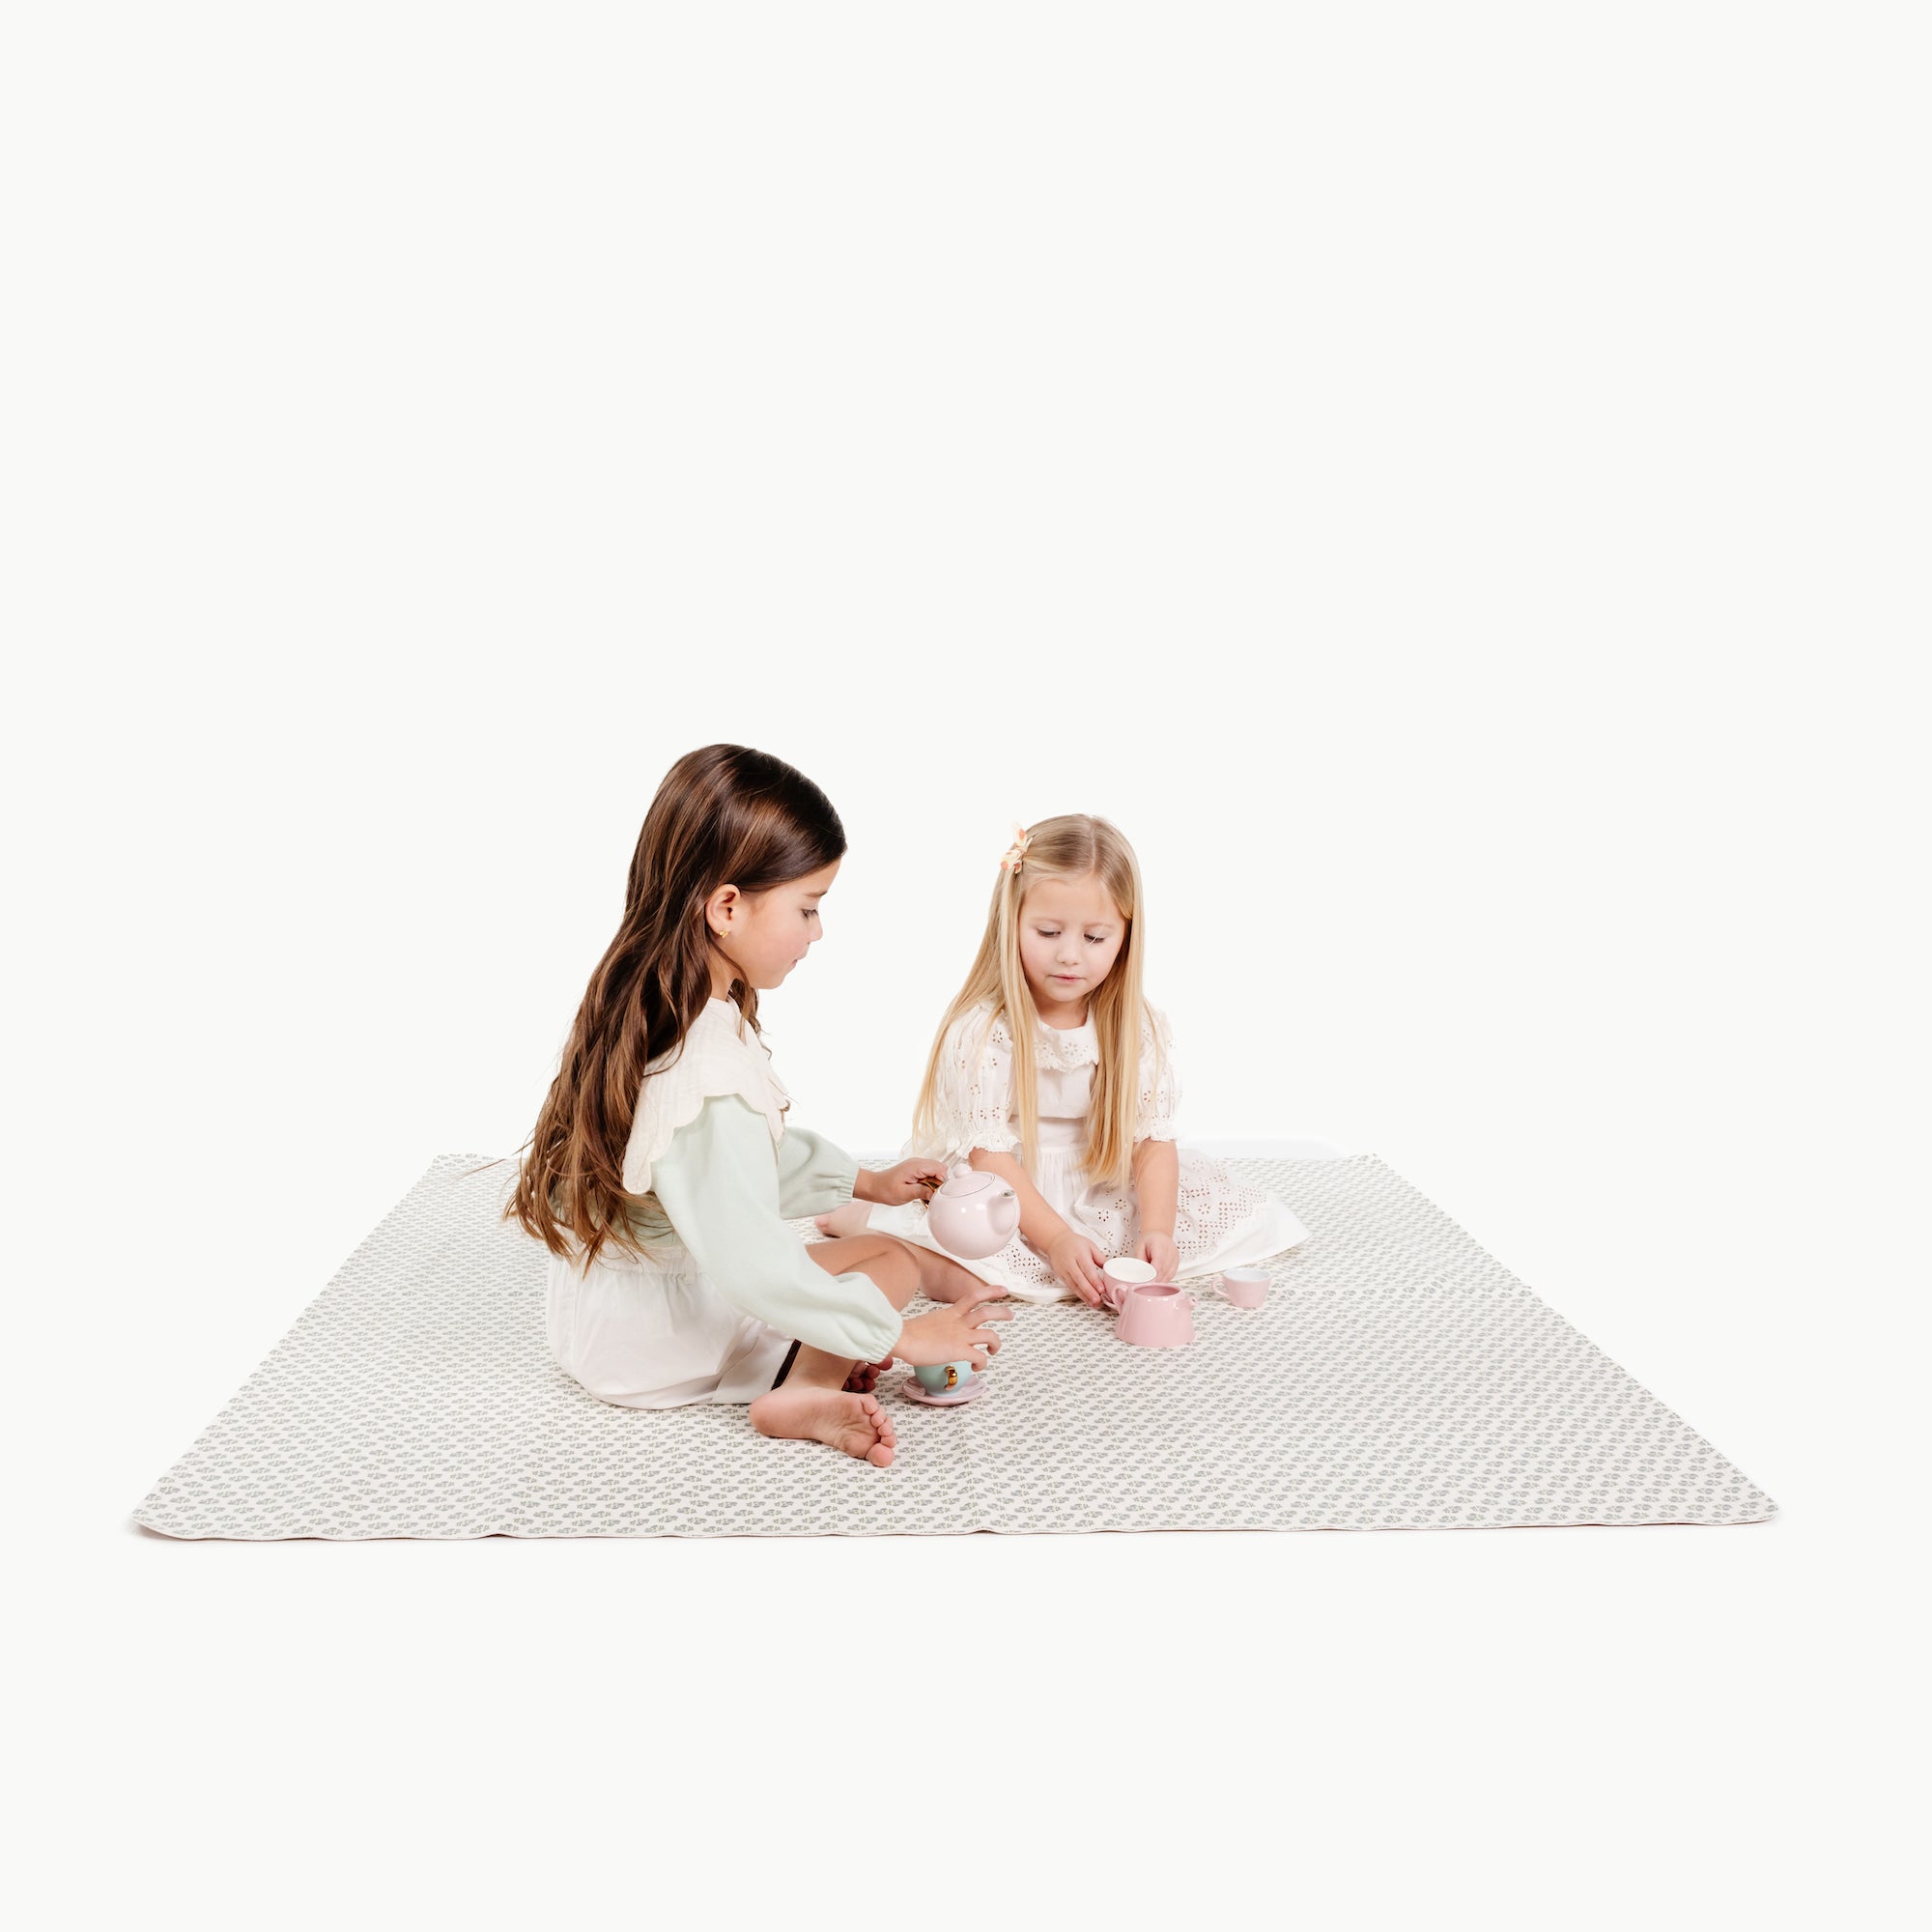 Meadow / Square@kids playing on the meadow square mat